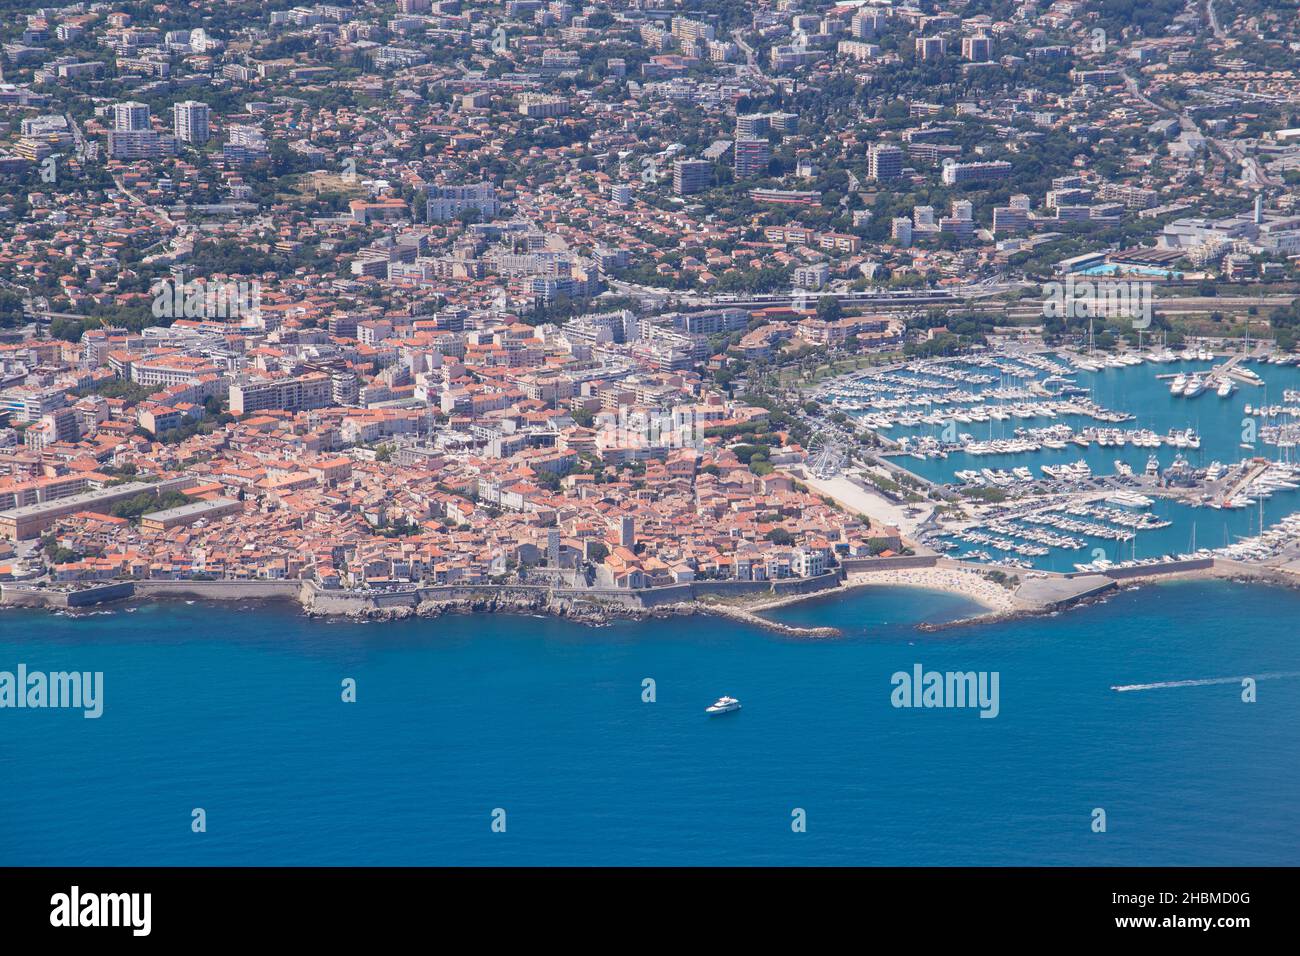 Aerial view of historic city centre of Antibes at the french Cote d'Azur coast Stock Photo